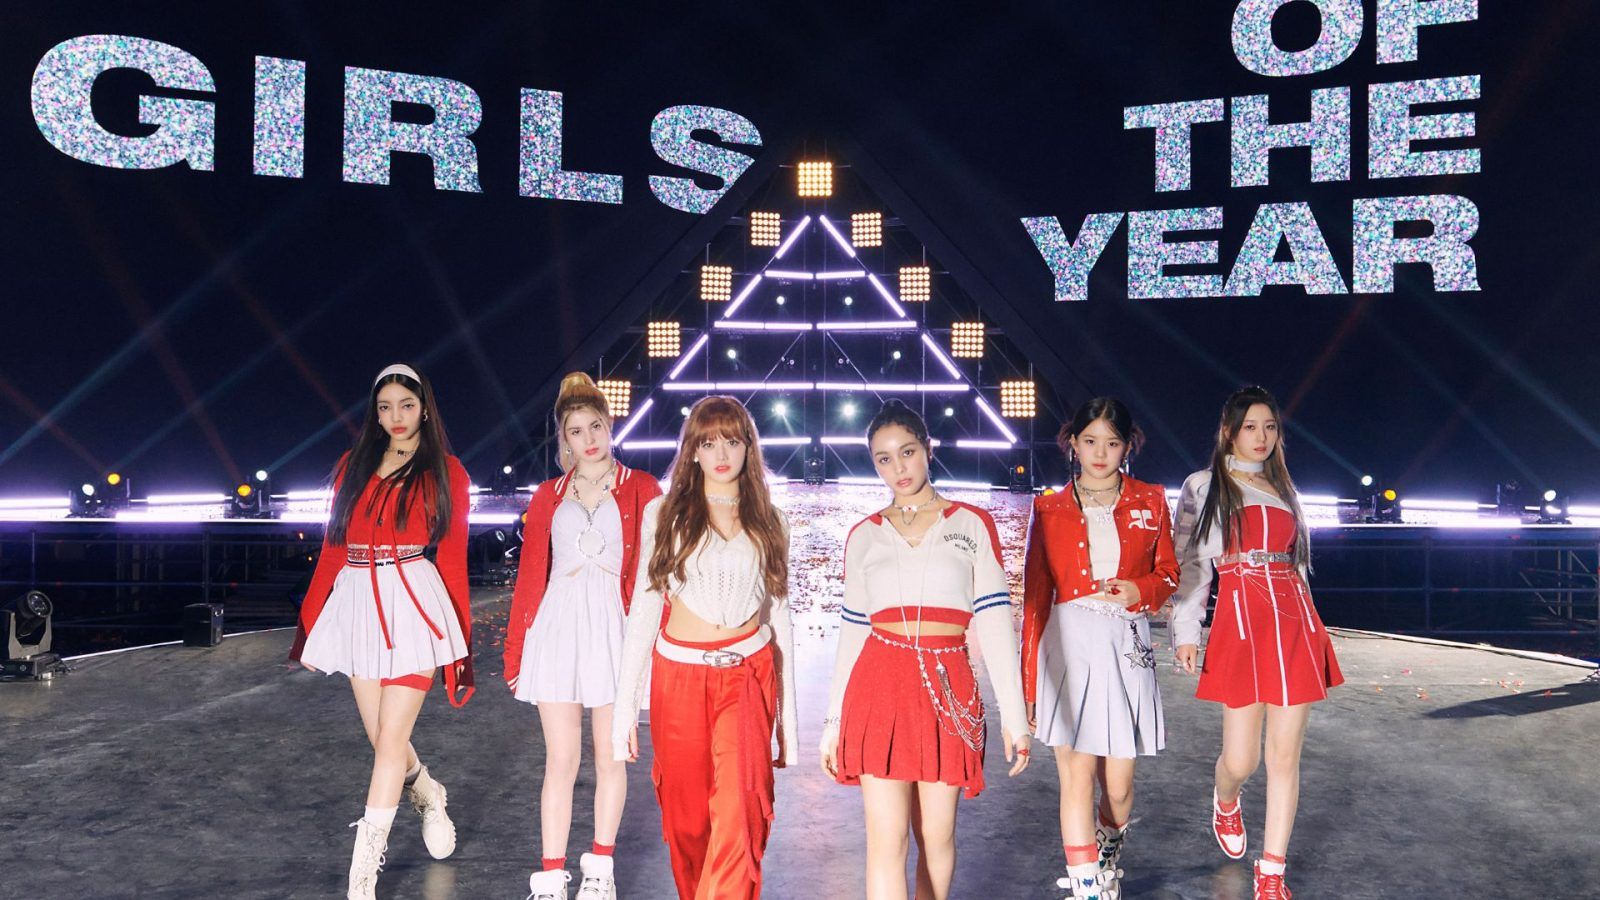 VCHA, JYP Entertainment's new girl group is ready to take K-pop global